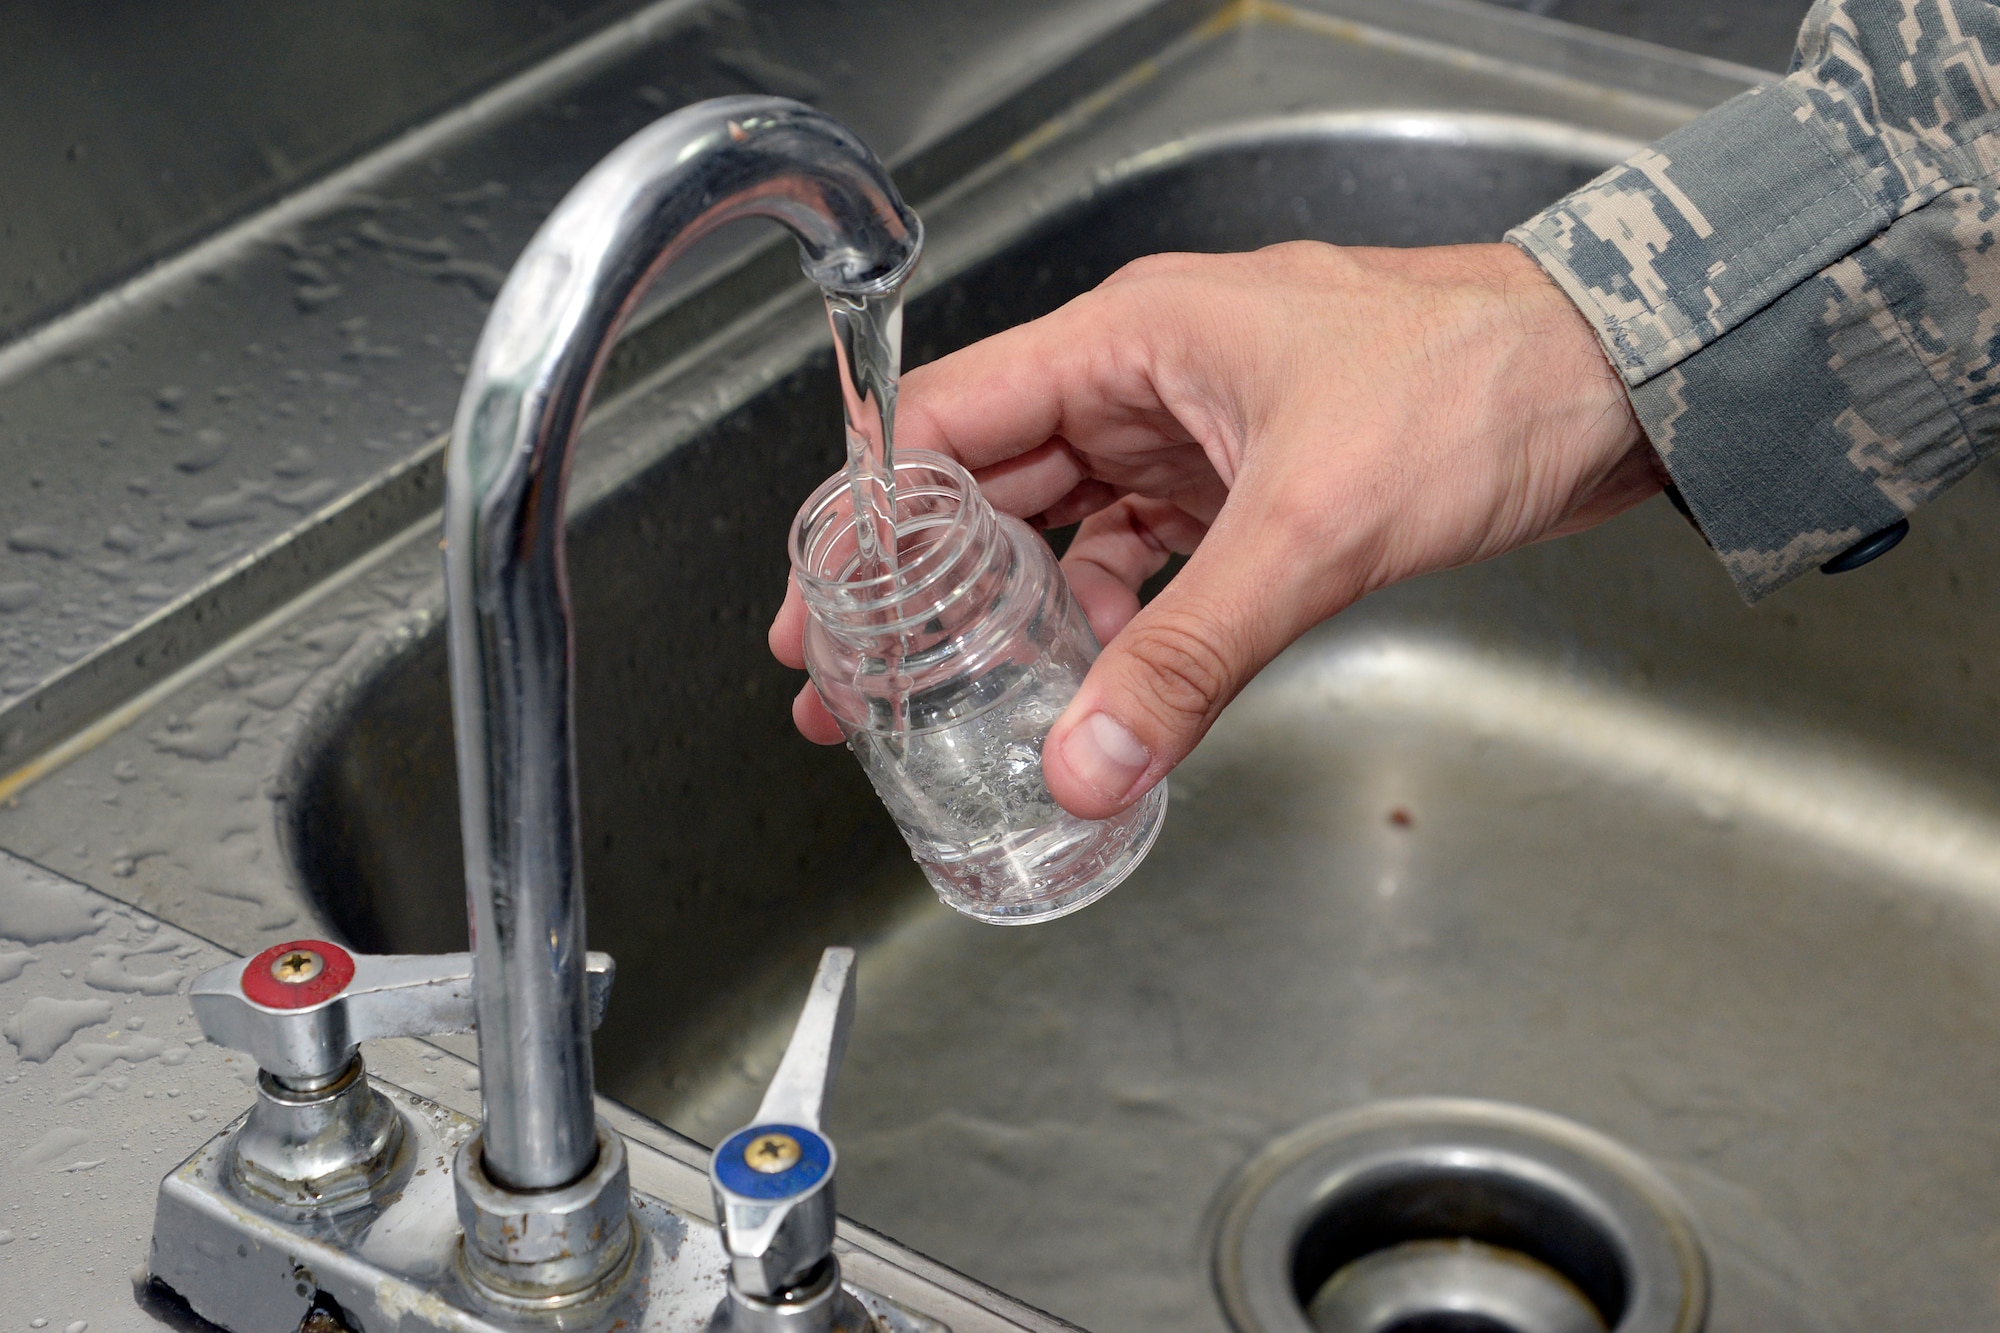 Staff Sgt. Dennis, bioenvironmental engineering technician, takes a water sample from the water supply at the Oasis Dining Facility at an undisclosed location in Southwest Asia Dec. 24, 2014. Bacteriological food is added to the water sample and incubated for 24 hours to measure the amount of total coliforms and the presence or absence of e-coli. Dennis is currently deployed from Joint Base San Antonio, Texas and is a native of San Antonio, Texas. (U.S. Air Force photo/Tech. Sgt. Marie Brown)